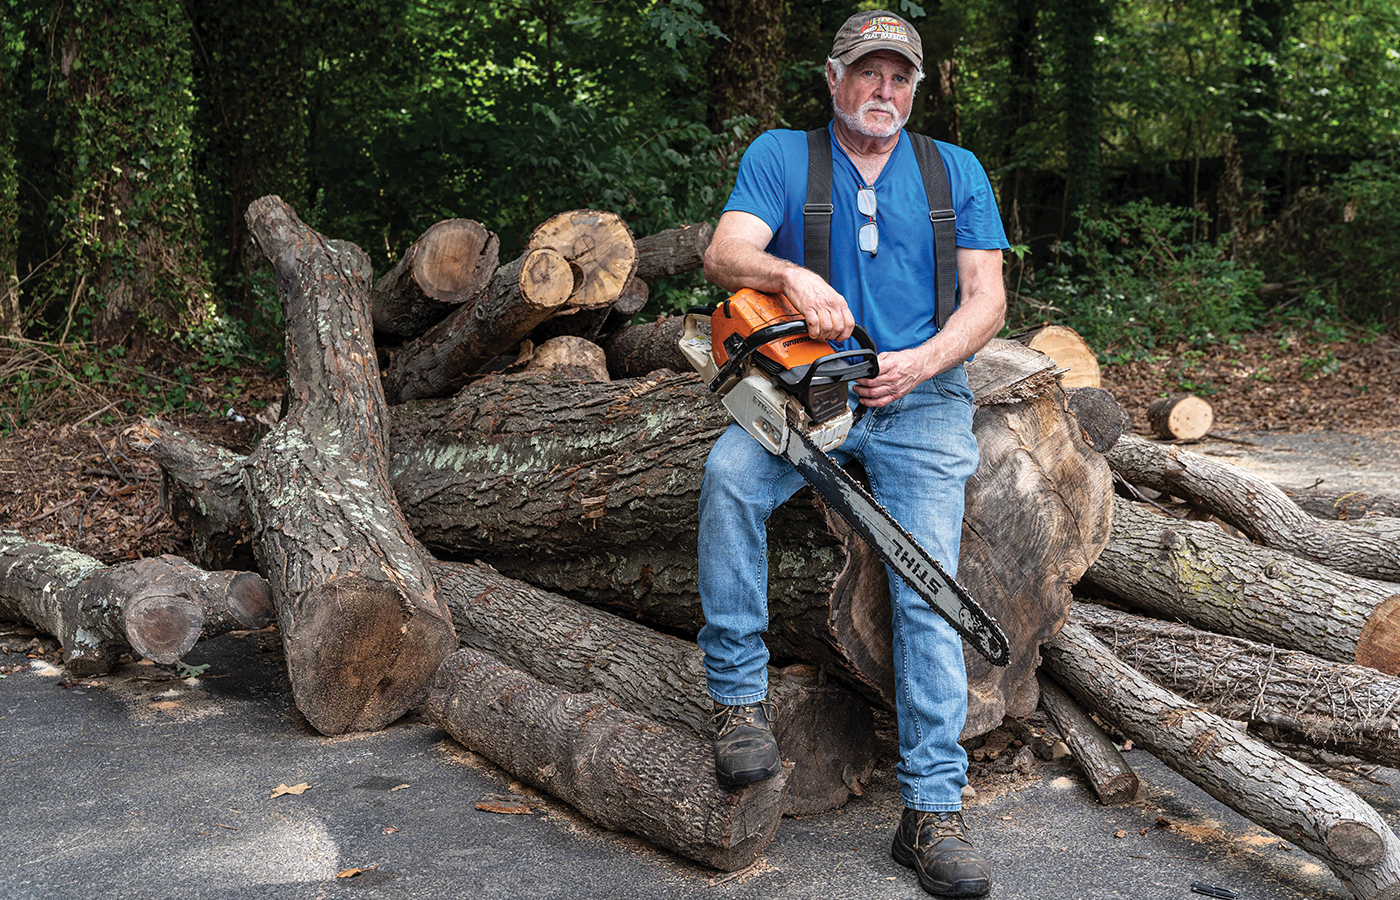 Buz holding a chain saw